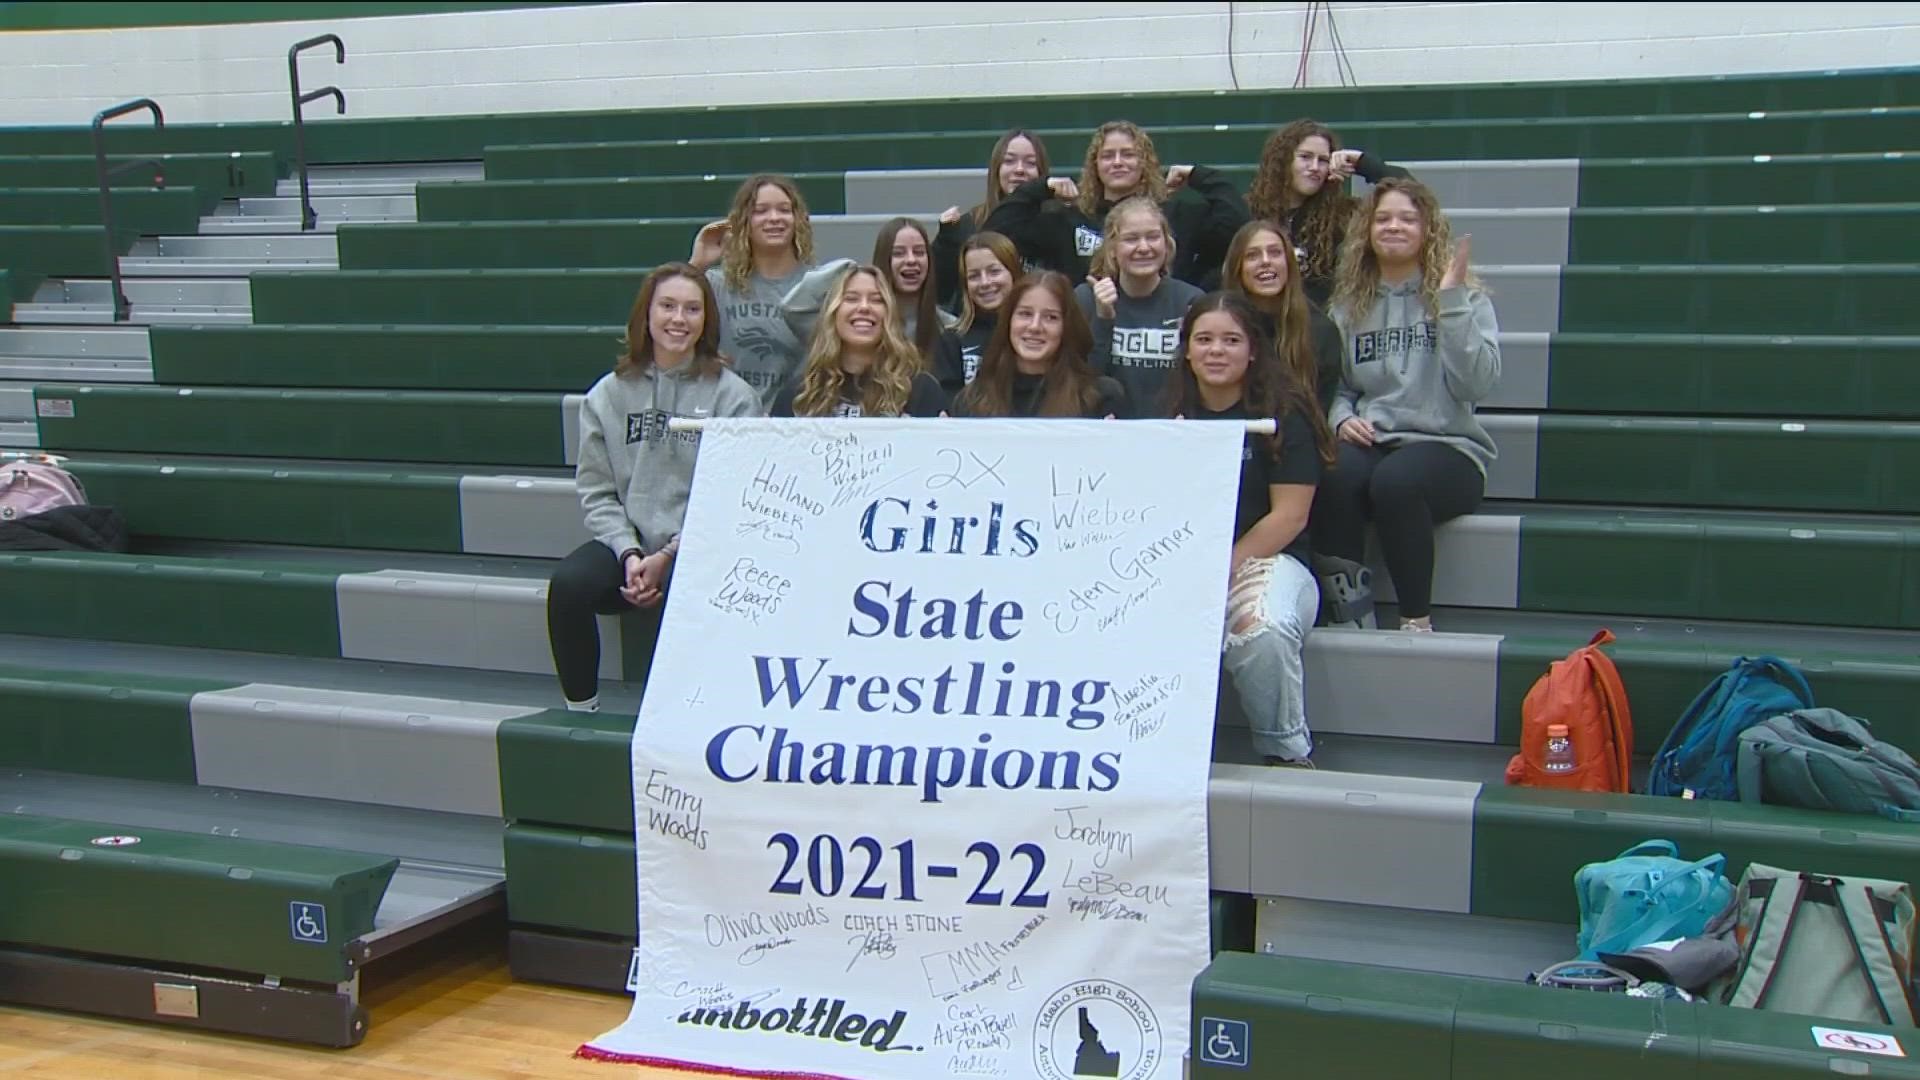 The Eagle Mustangs won the first sanctioned Idaho Girls High School State Wrestling Championship and is grappling for another one this year.